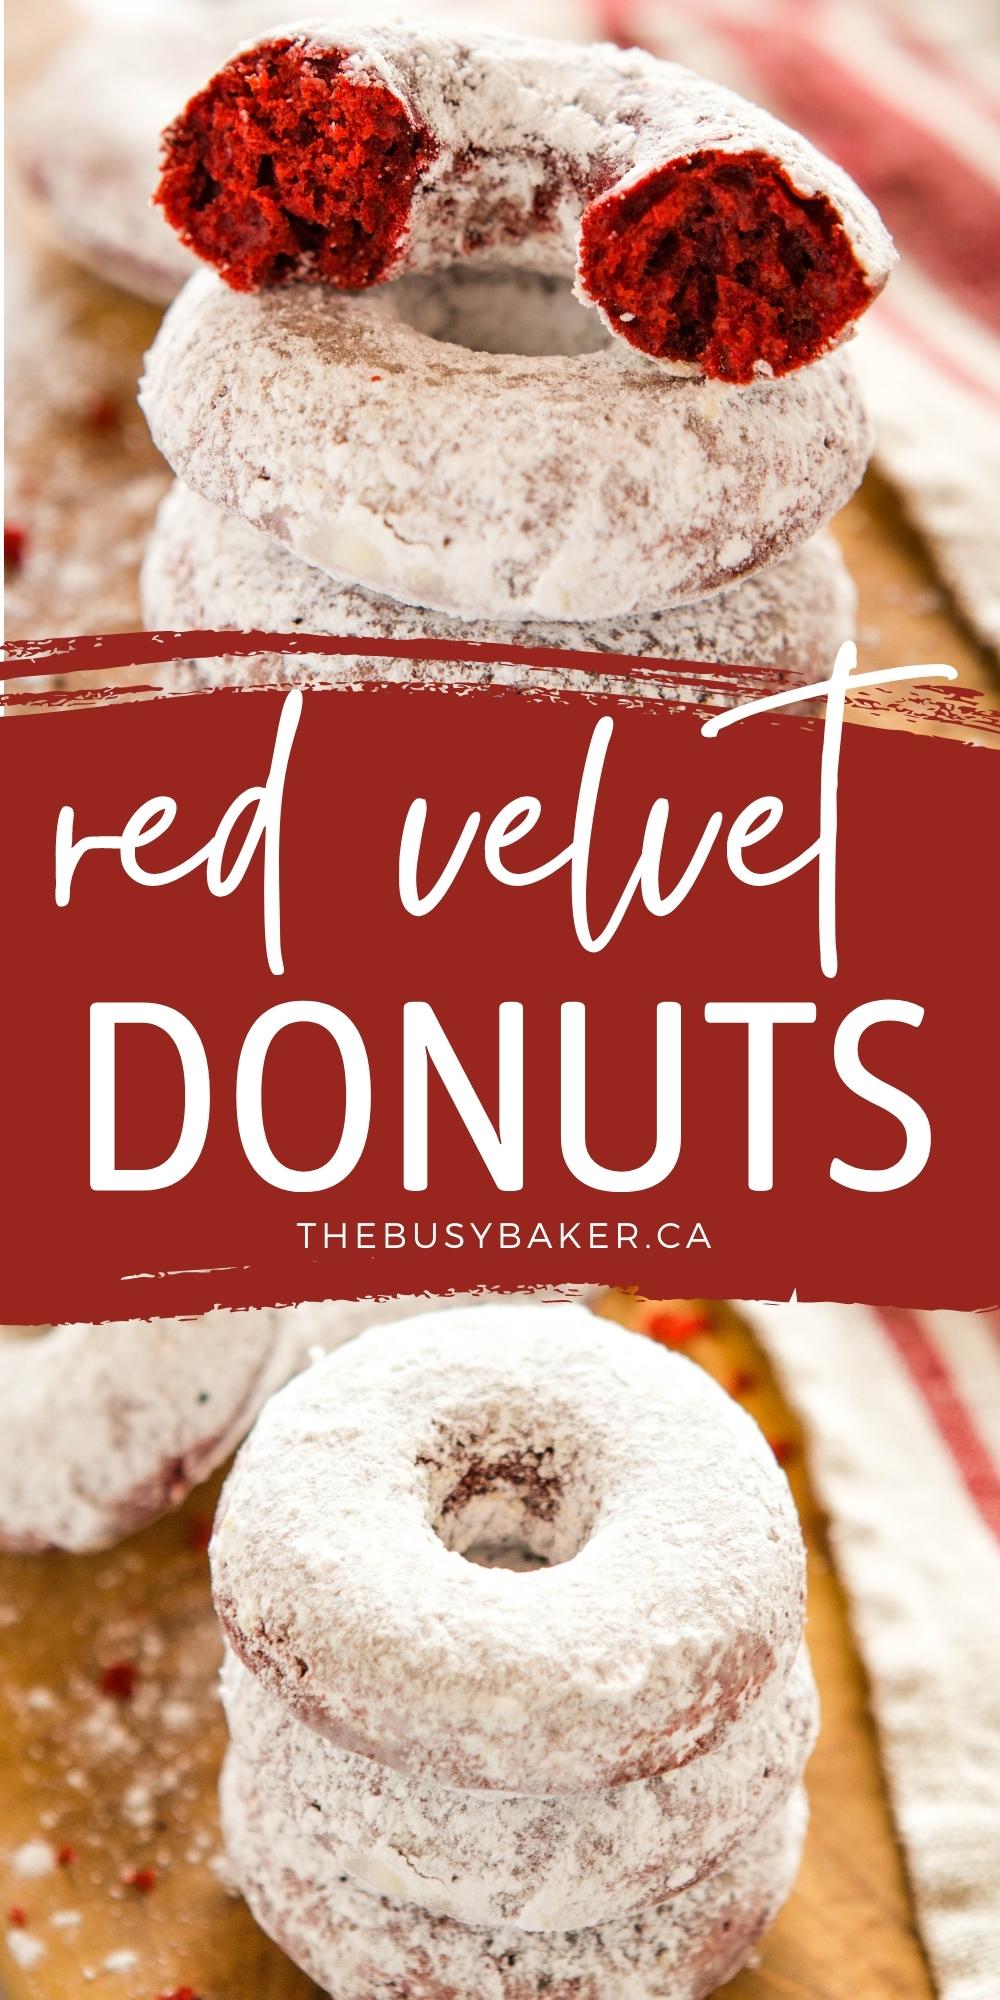 These Red Velvet Donuts are a delicious treat that's easy to make and bursting with classic red velvet flavours! Perfectly fluffy and tender, and dipped in powdered sugar! Recipe from thebusybaker.ca! #redvelvet #redvelvetdonuts #donuts #bakeddonuts #dessert #valentinesday #bakeddonuts via @busybakerblog